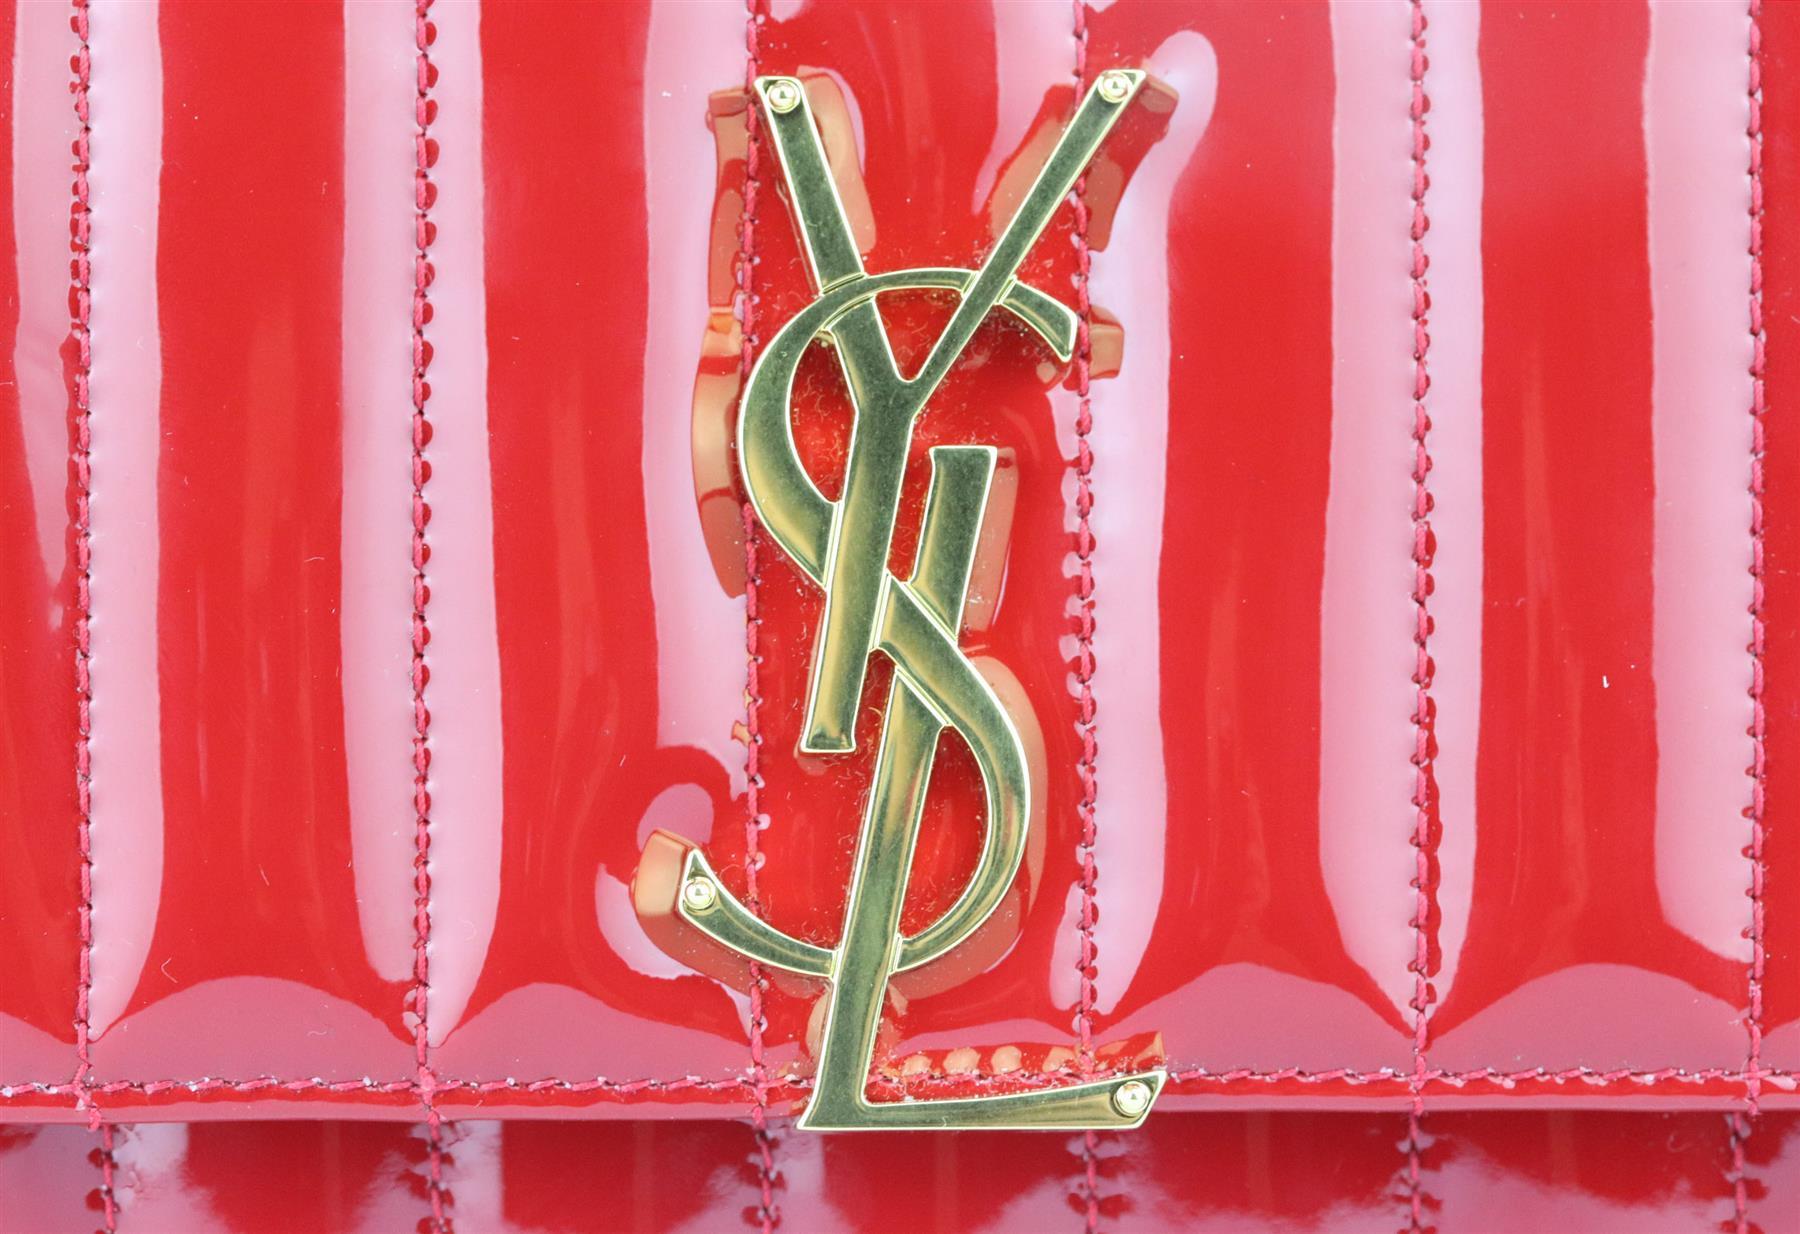 ysl red patent leather bag